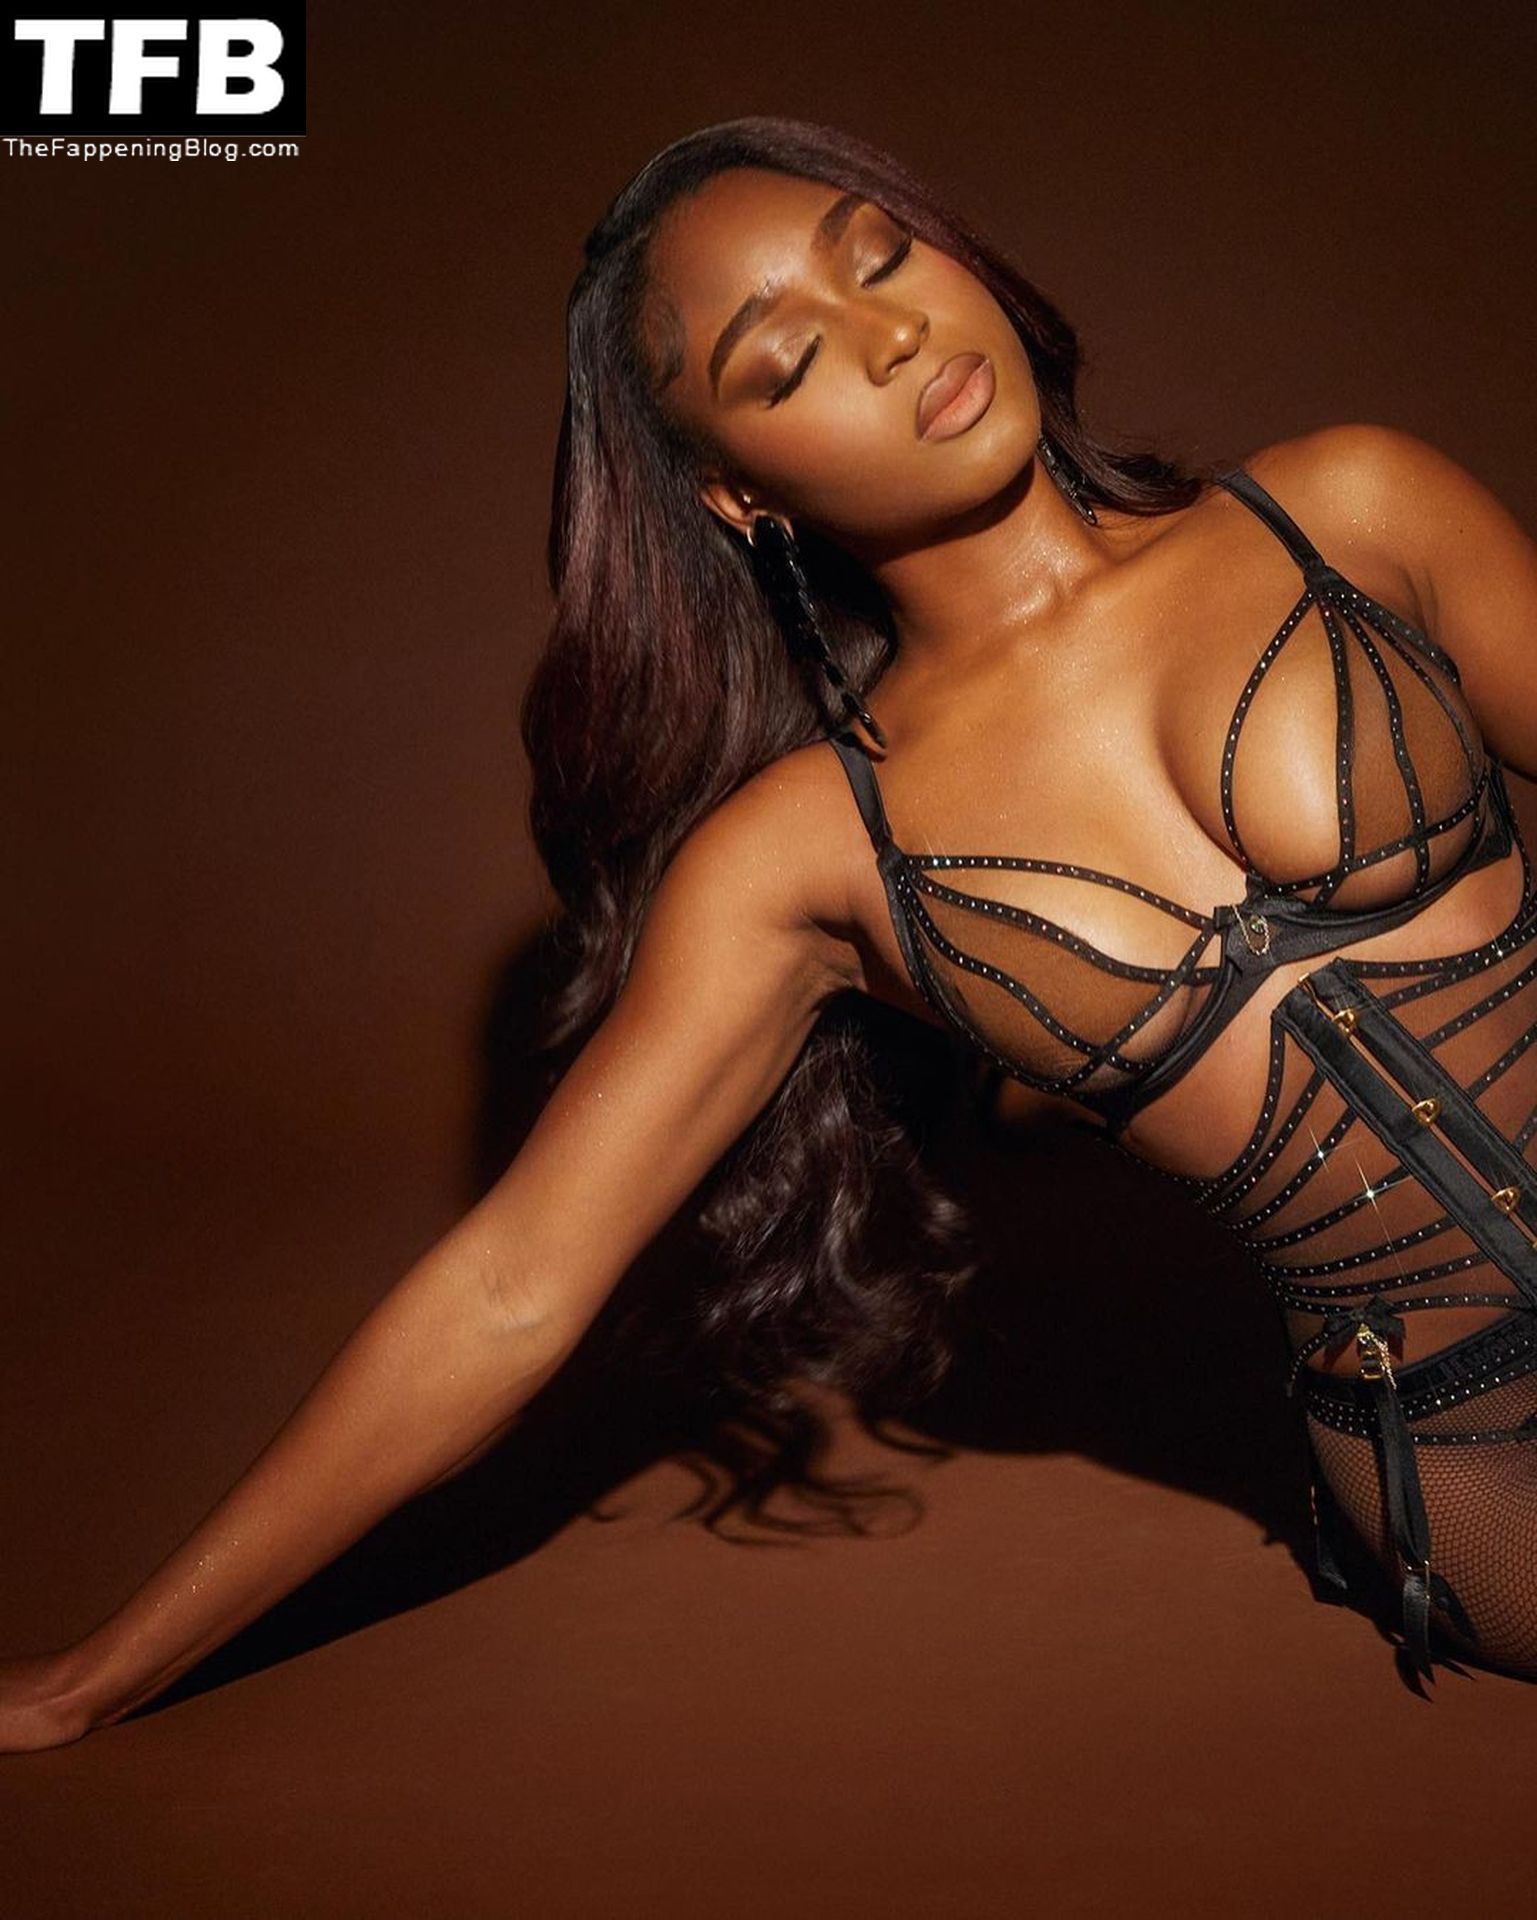 Normani Kordei Sexy Lingerie 6 thefappeningblog.com  - Normani Poses in Lingerie (7 Photos)